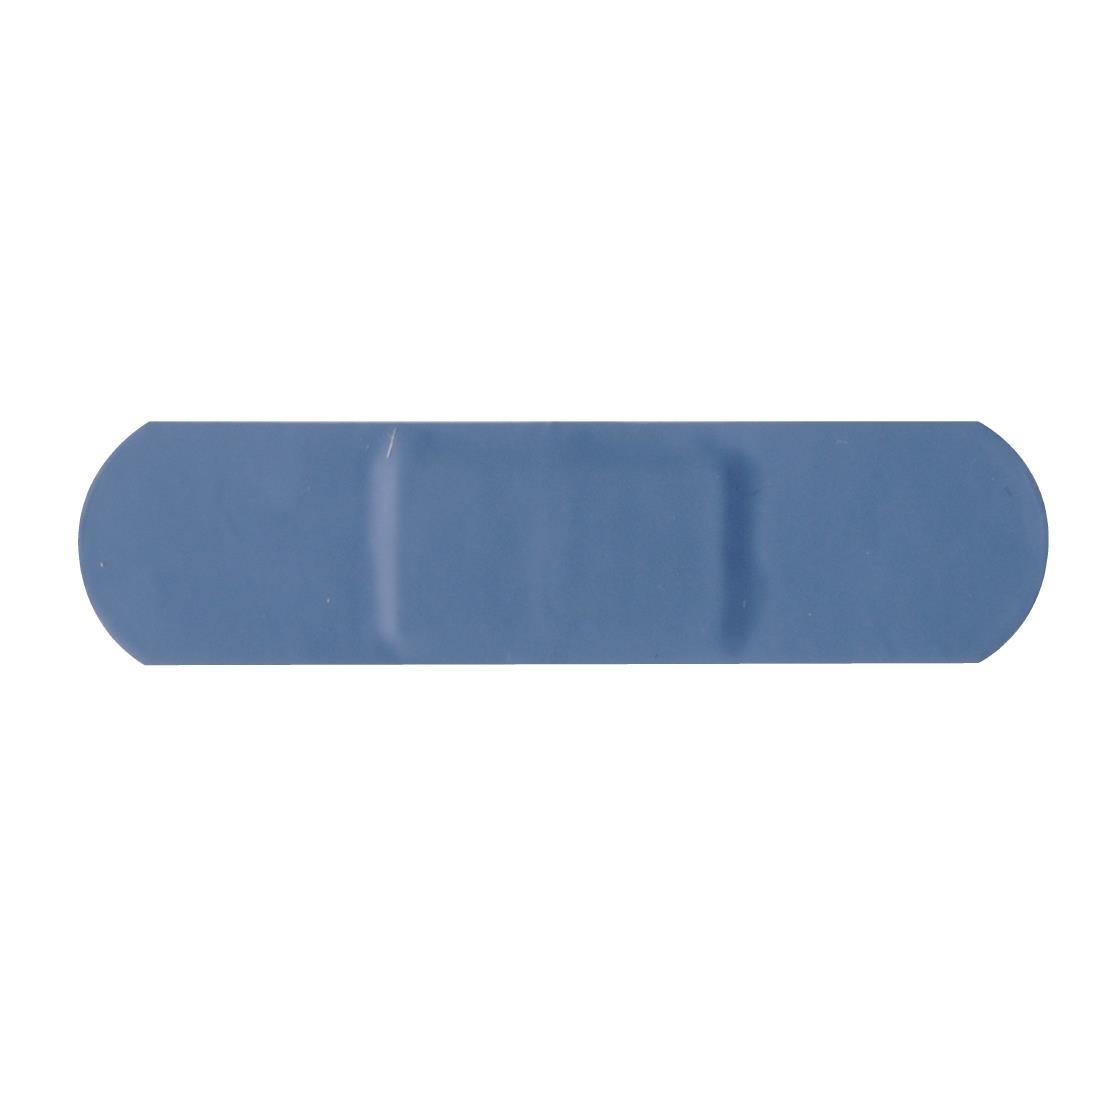 AEROPLAST DETECTABLE BLUE PLASTERS EXTRA WIDE 25X75MM  - BOX 100 - CD523  - 2